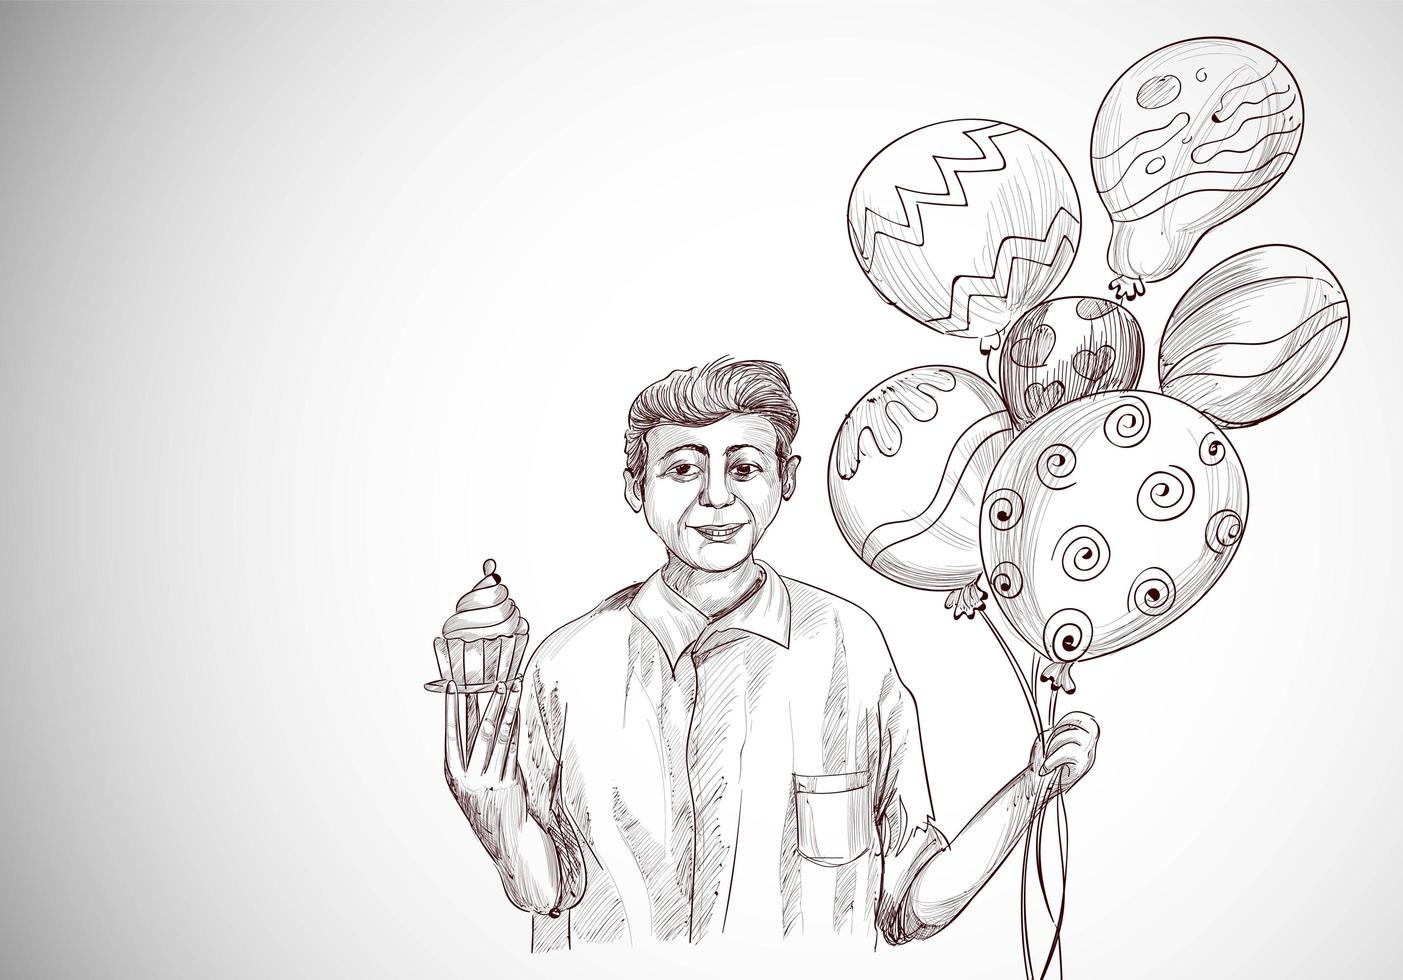 Happy Birthday Guy Looking with Holding Balloons and Cupcake Sketch vector